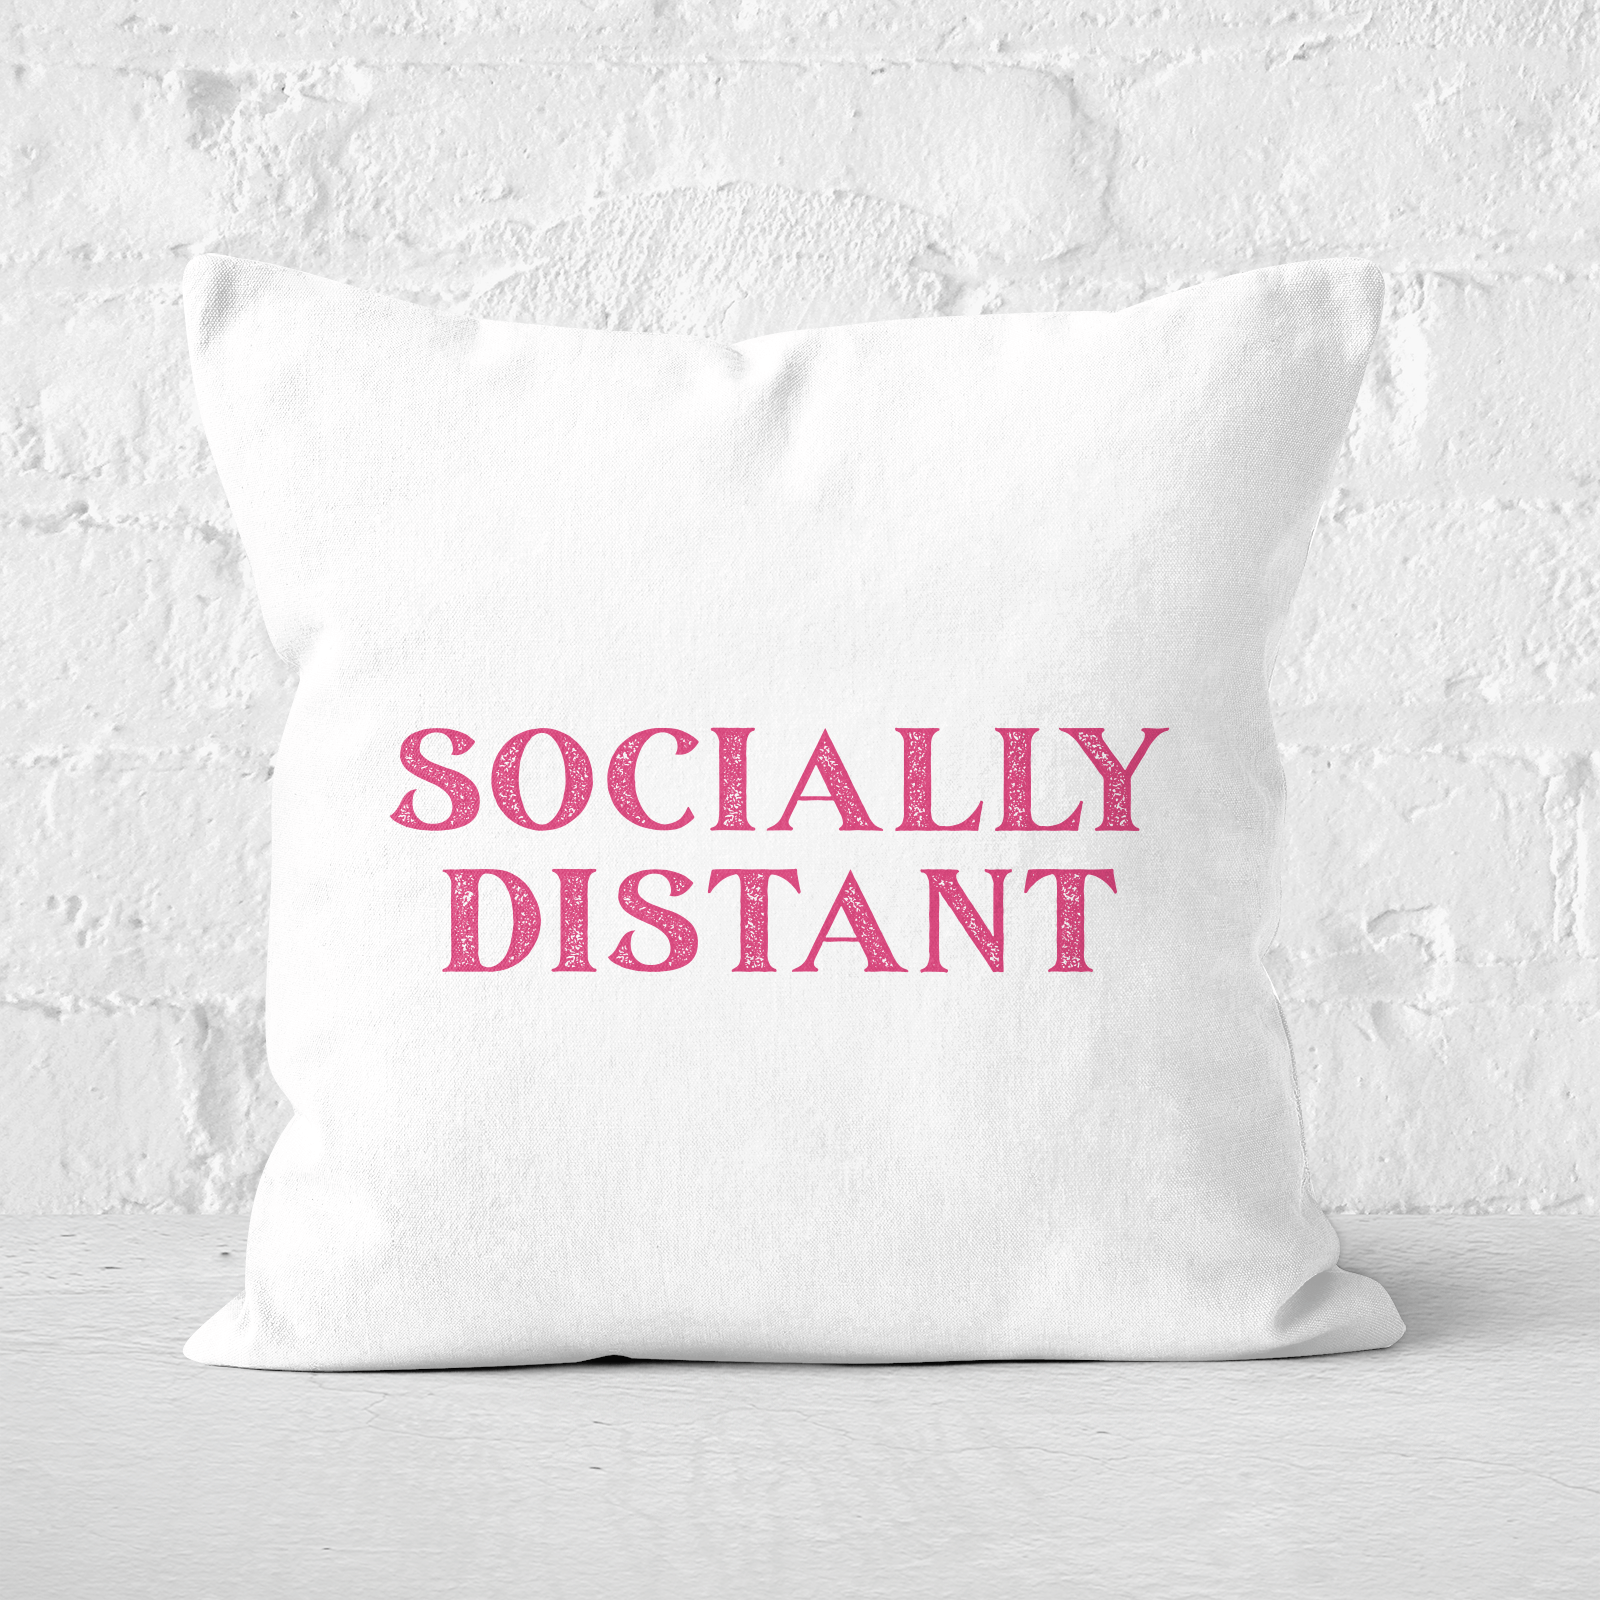 Socially Distant Square Cushion - 60x60cm - Soft Touch